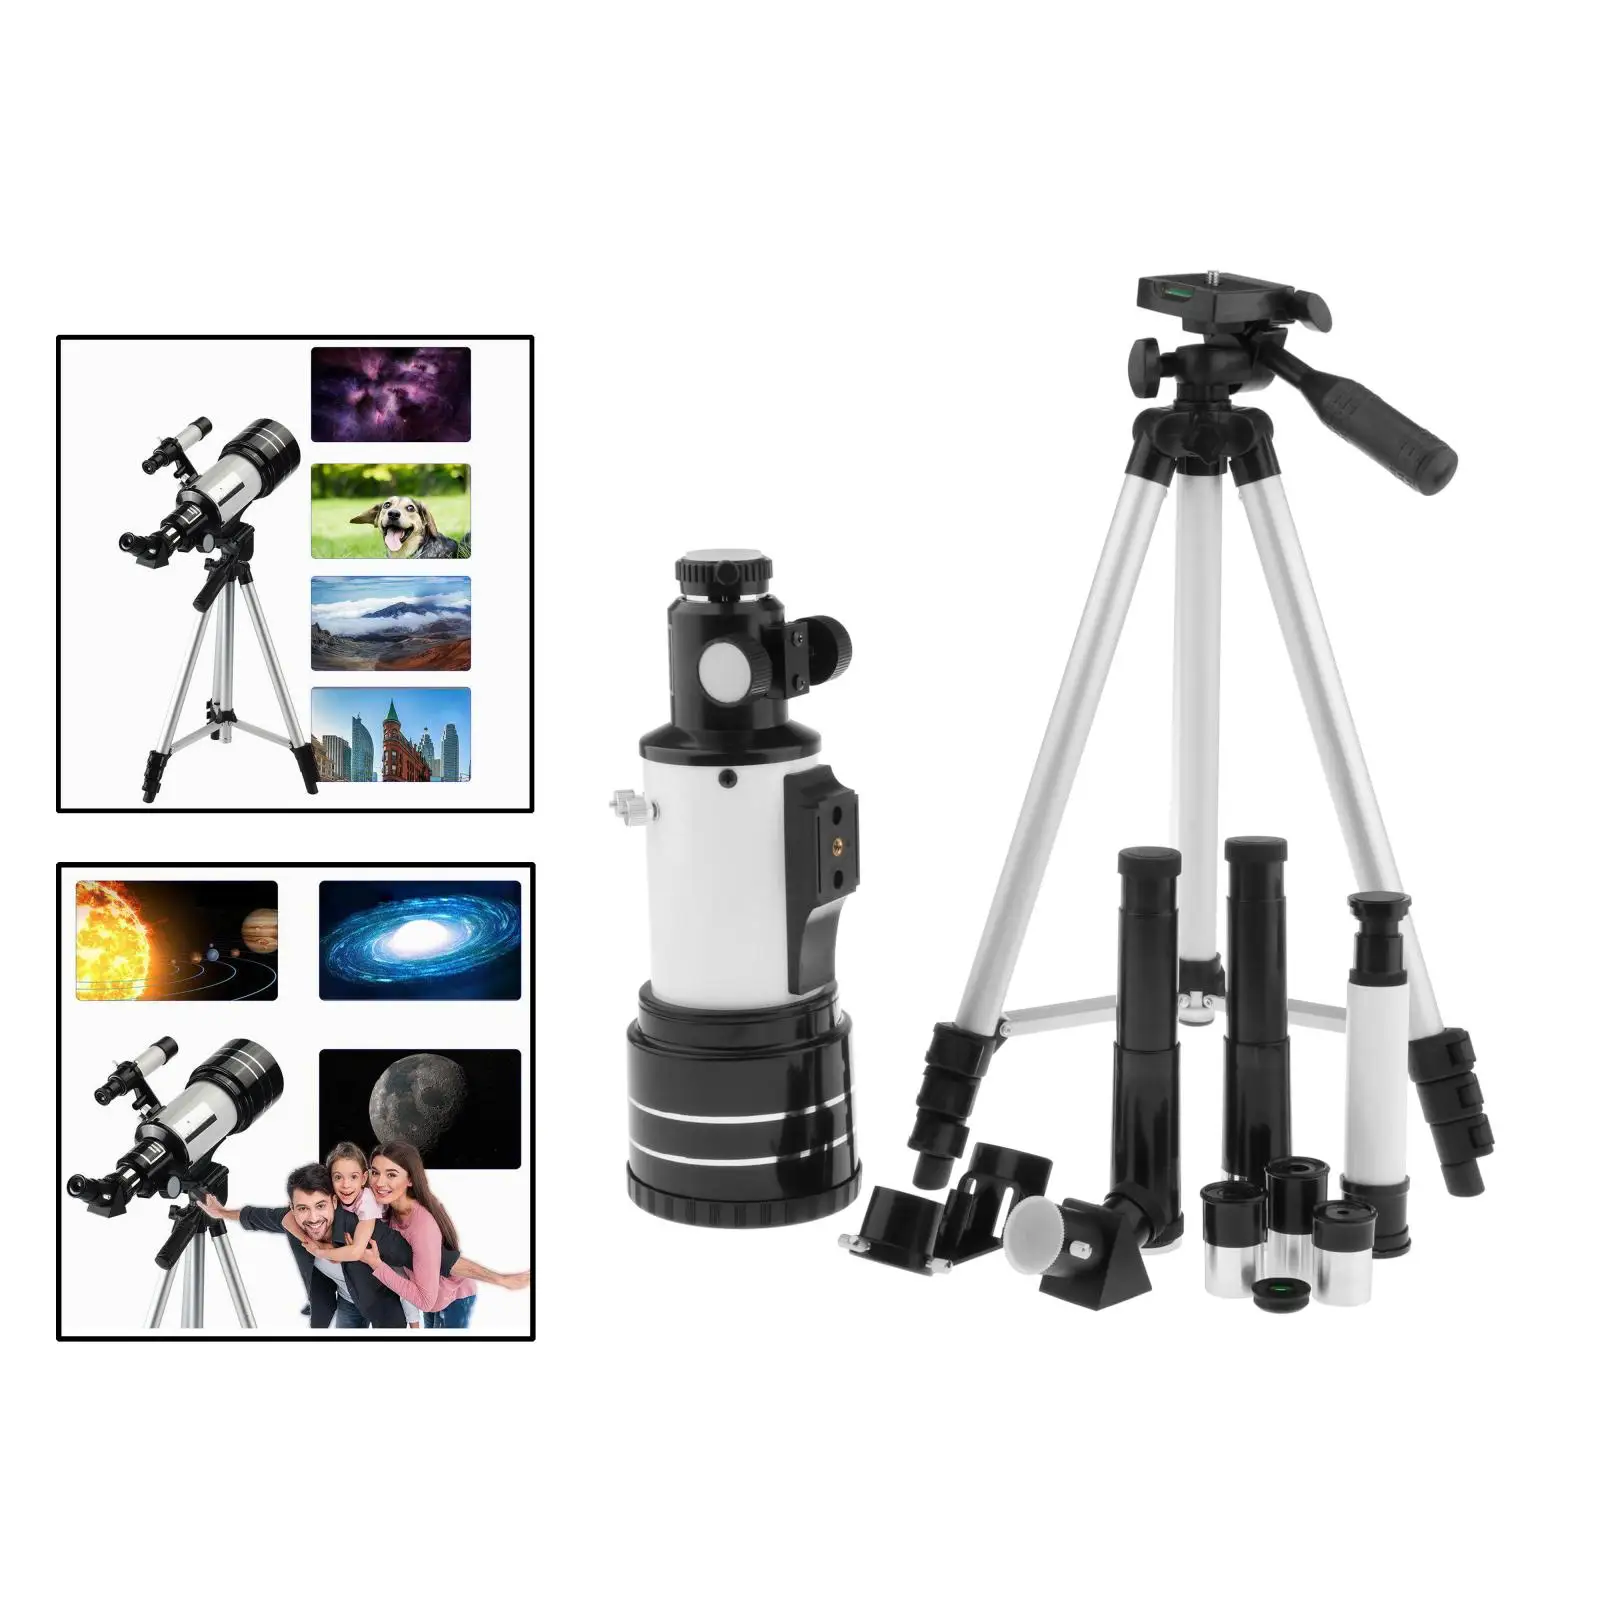 

Portable 70mm Aperture Travel Scope Refractor Telescope with Storage bag Nebula map for Kids Astronomy Beginners